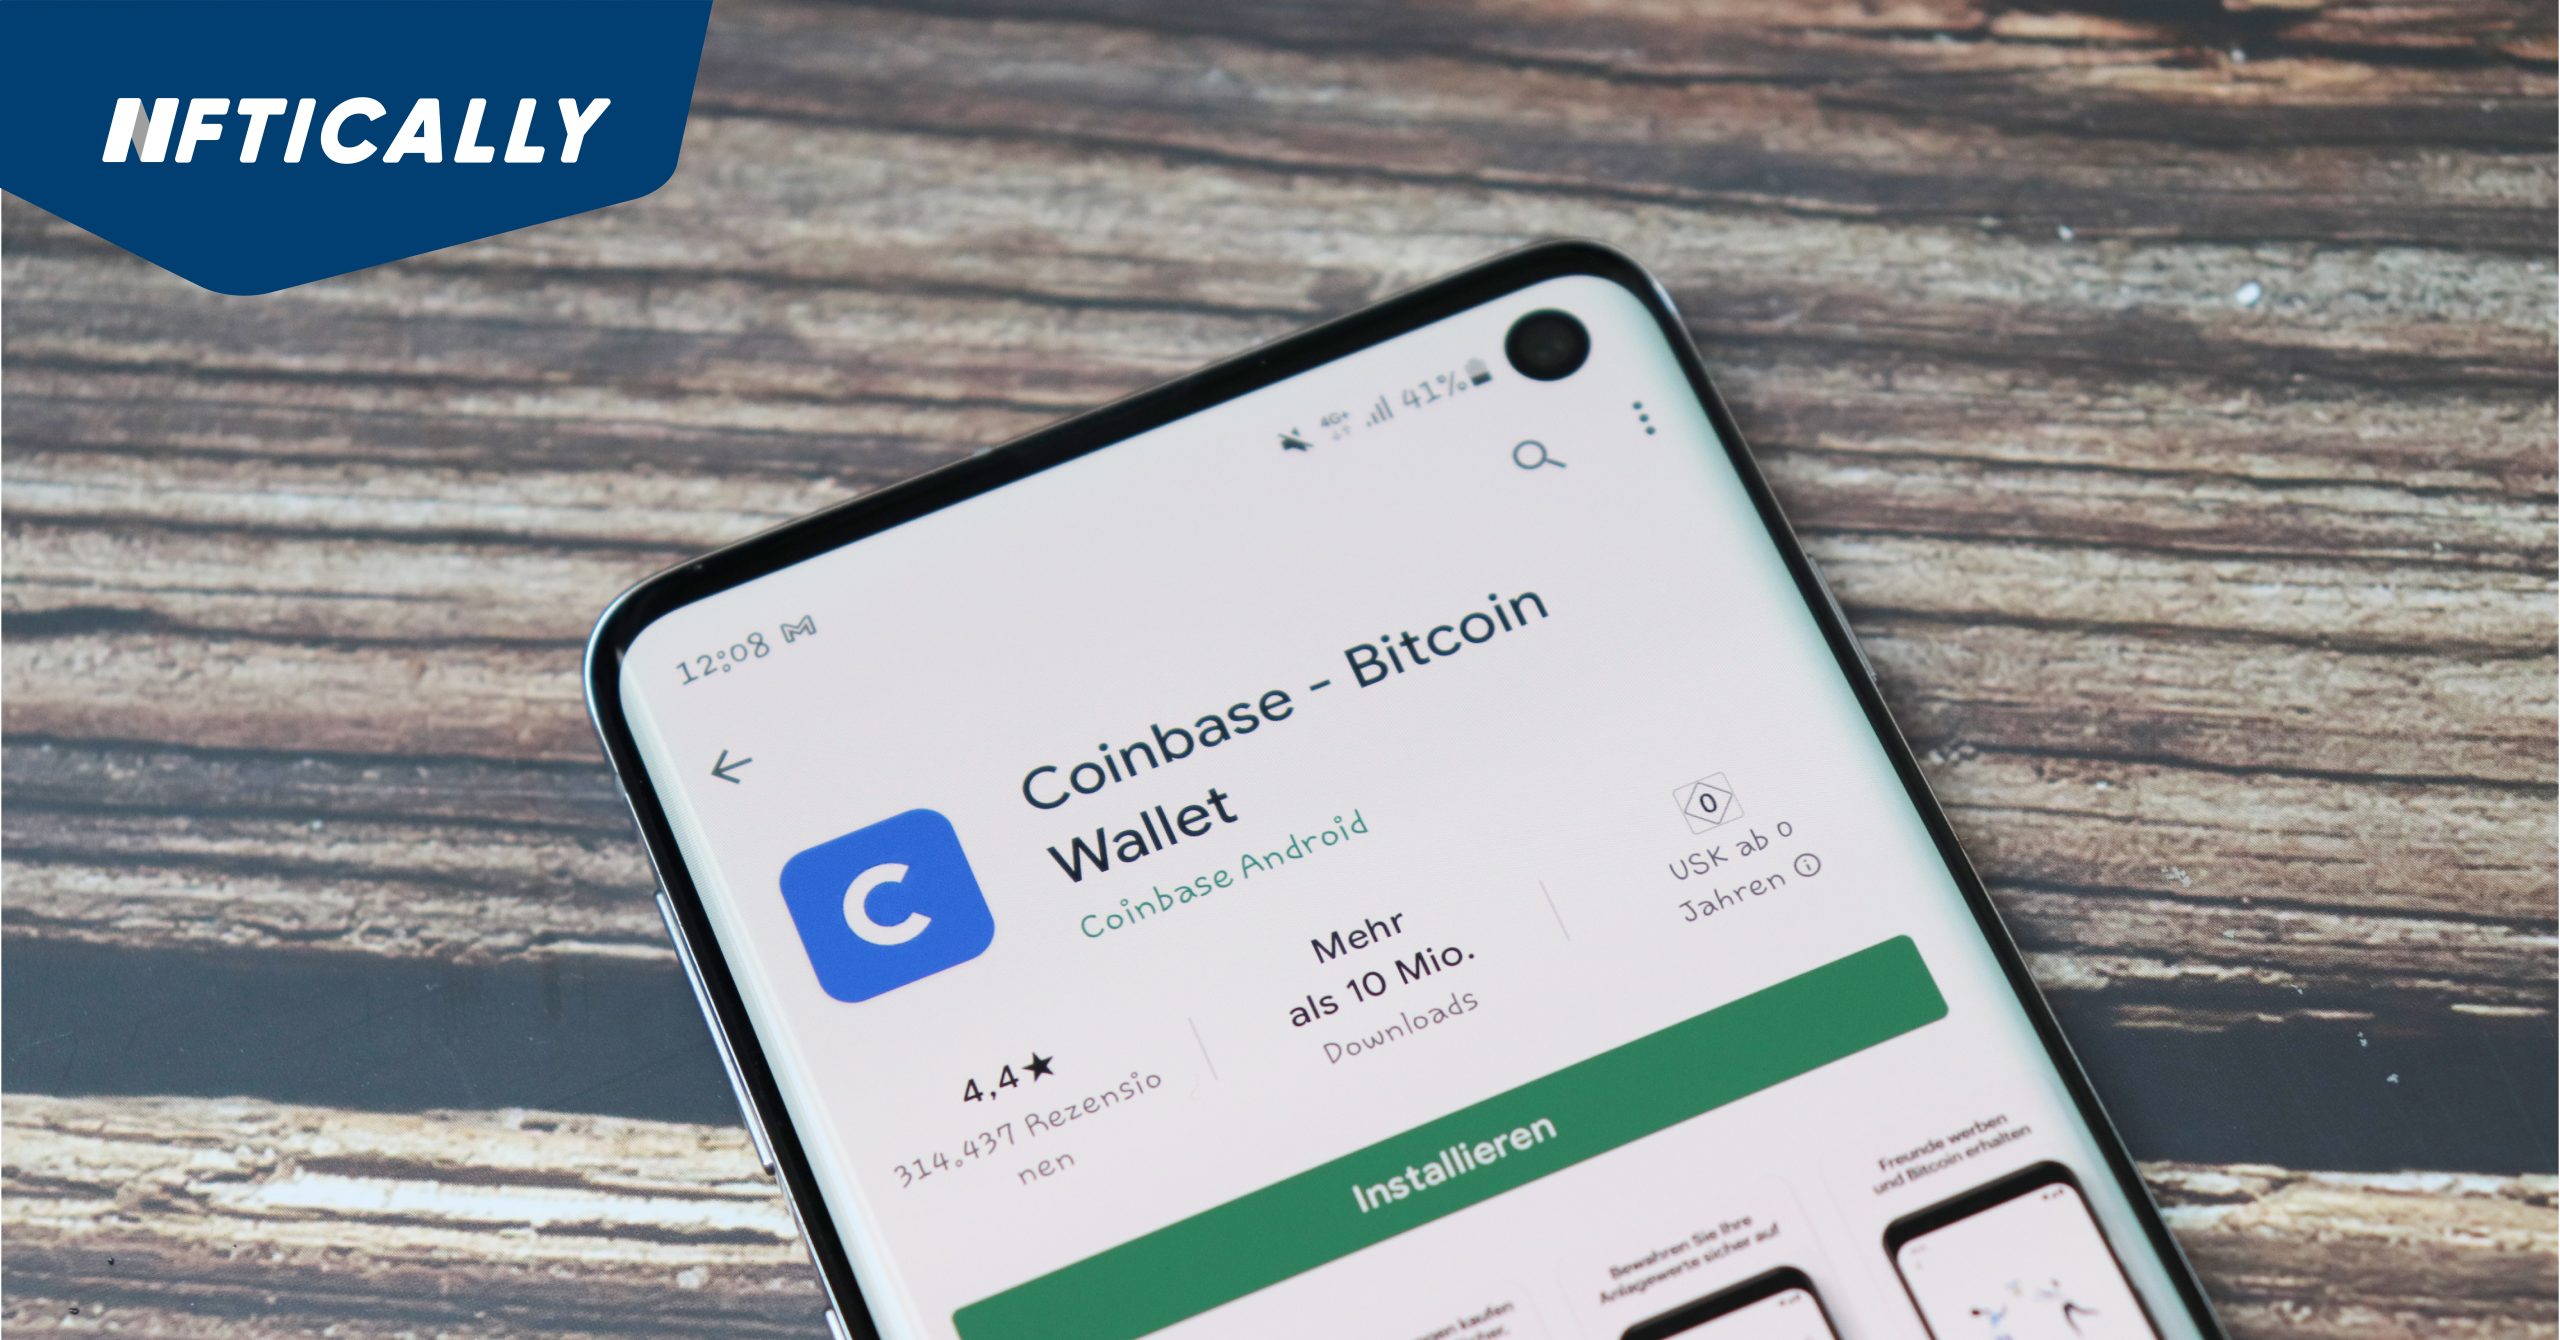 How to Use Coinbase Wallet on NFTICALLY